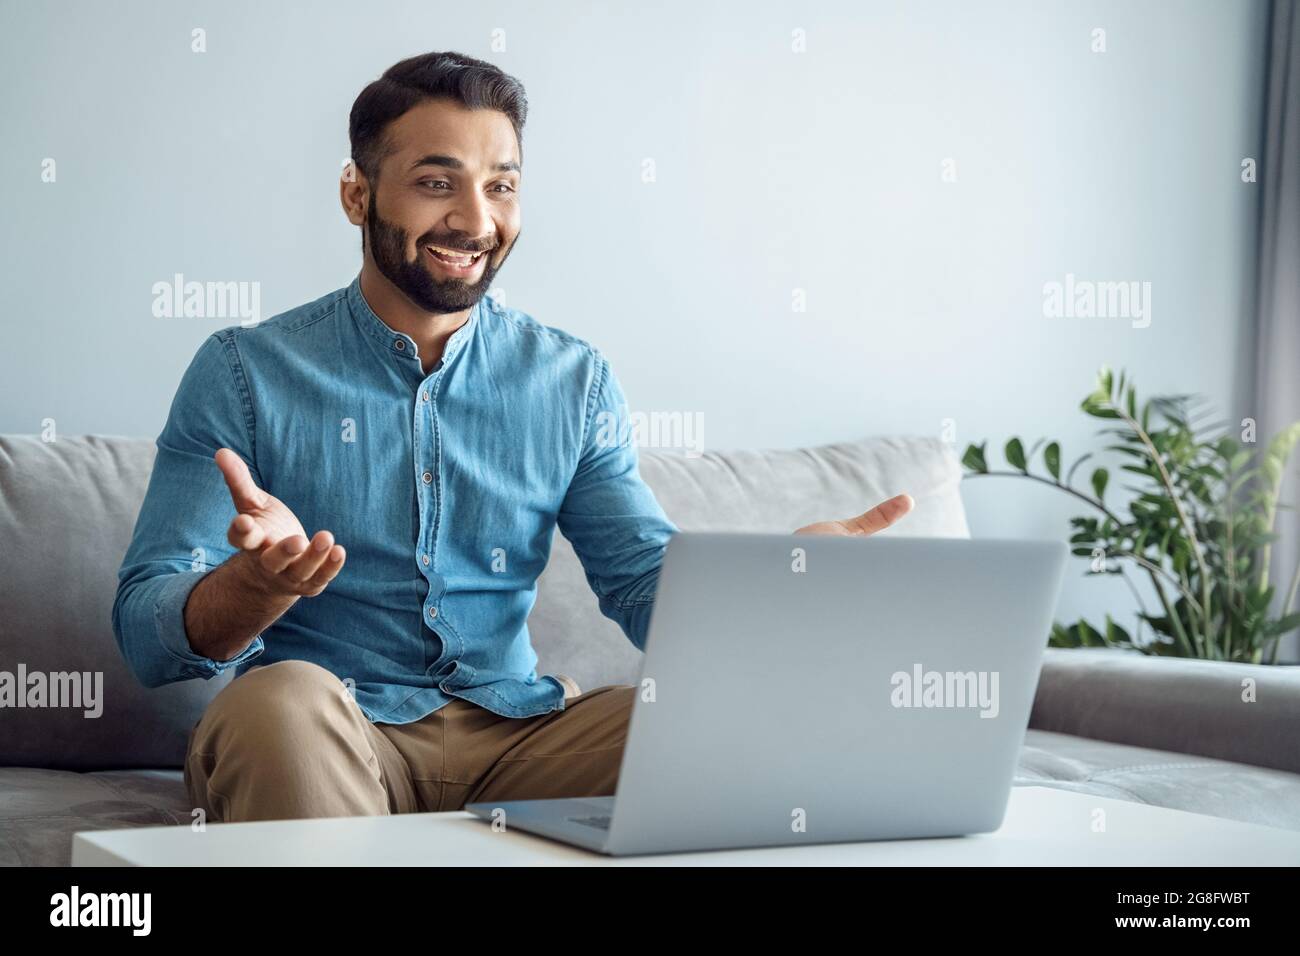 Happy toothy smiling indian man glad to see best friend making online video call Stock Photo